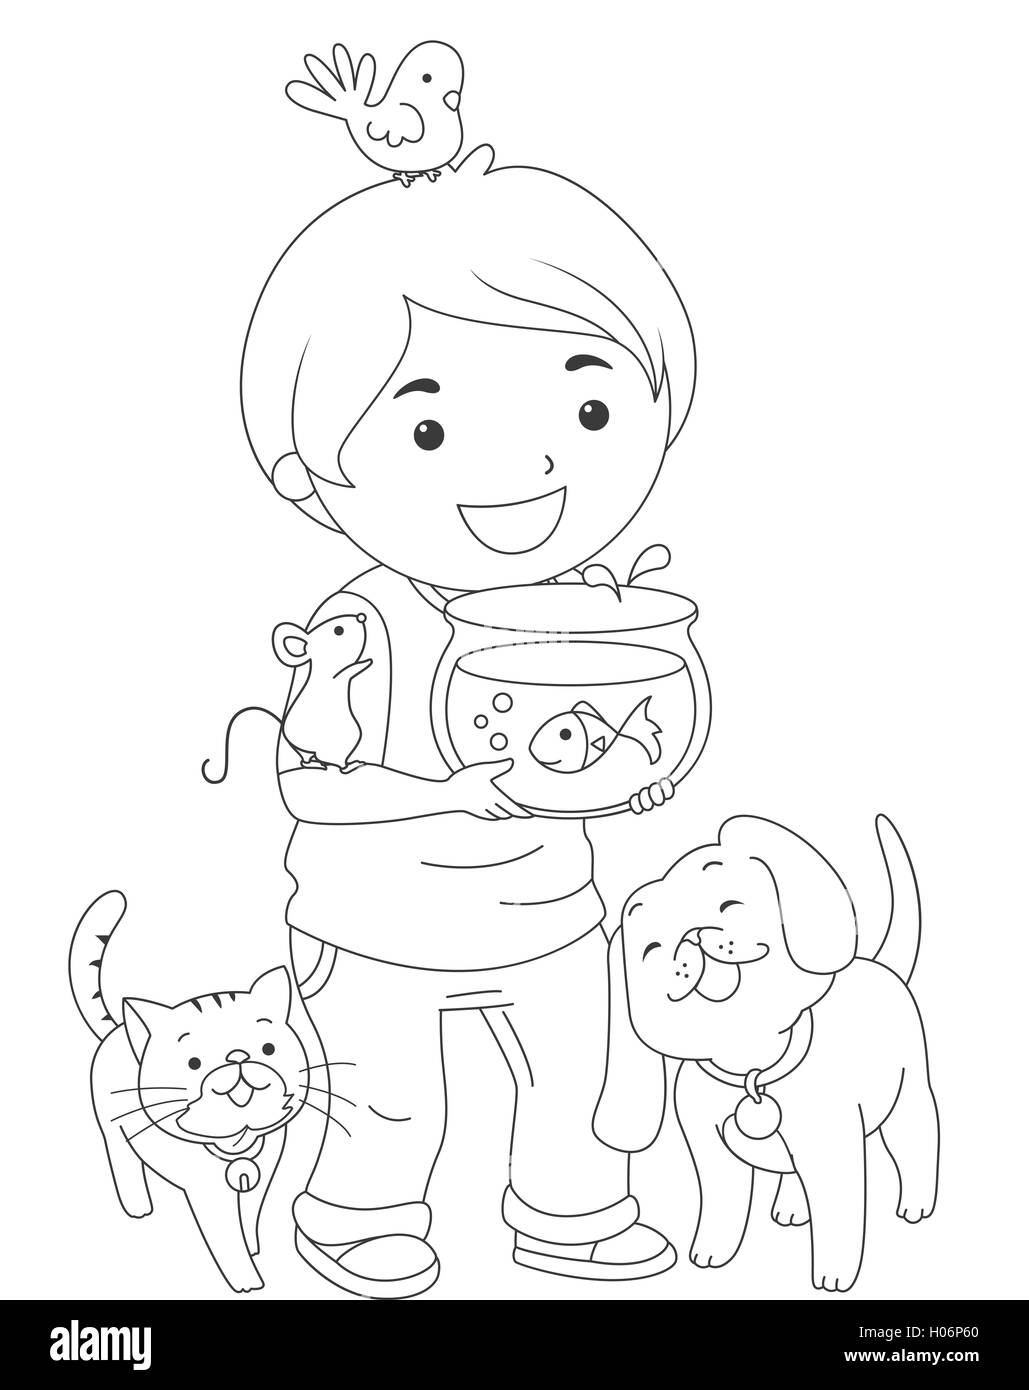 Black and White Coloring Page Illustration of a Boy Carrying Pets Stock Photo